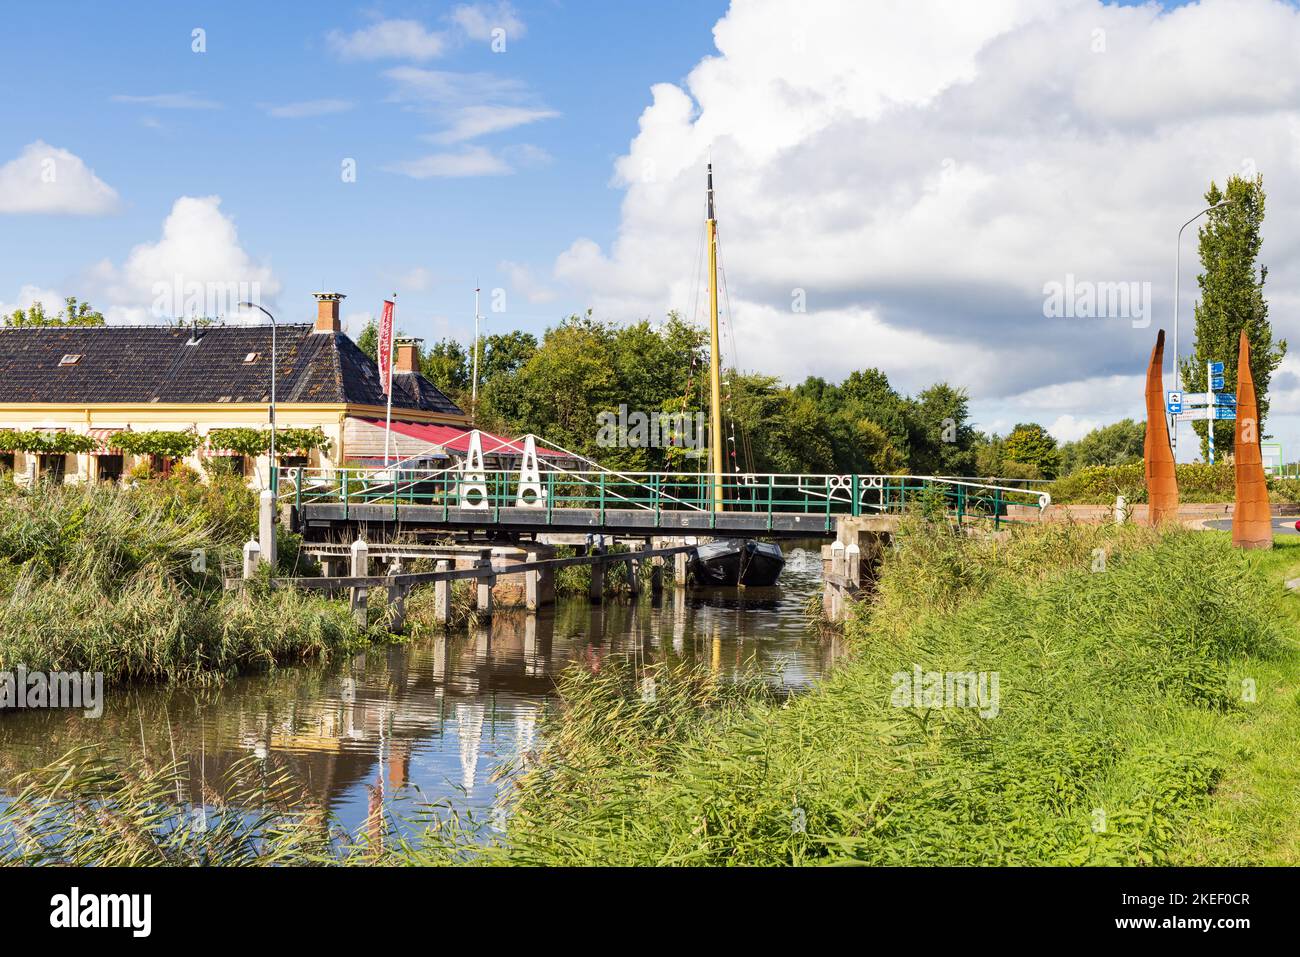 Briltil, The Netherlands - September 25, 2022: Scenic view of small village Briltil, municipality Westerkwartier in Groningen province in the Netherla Stock Photo